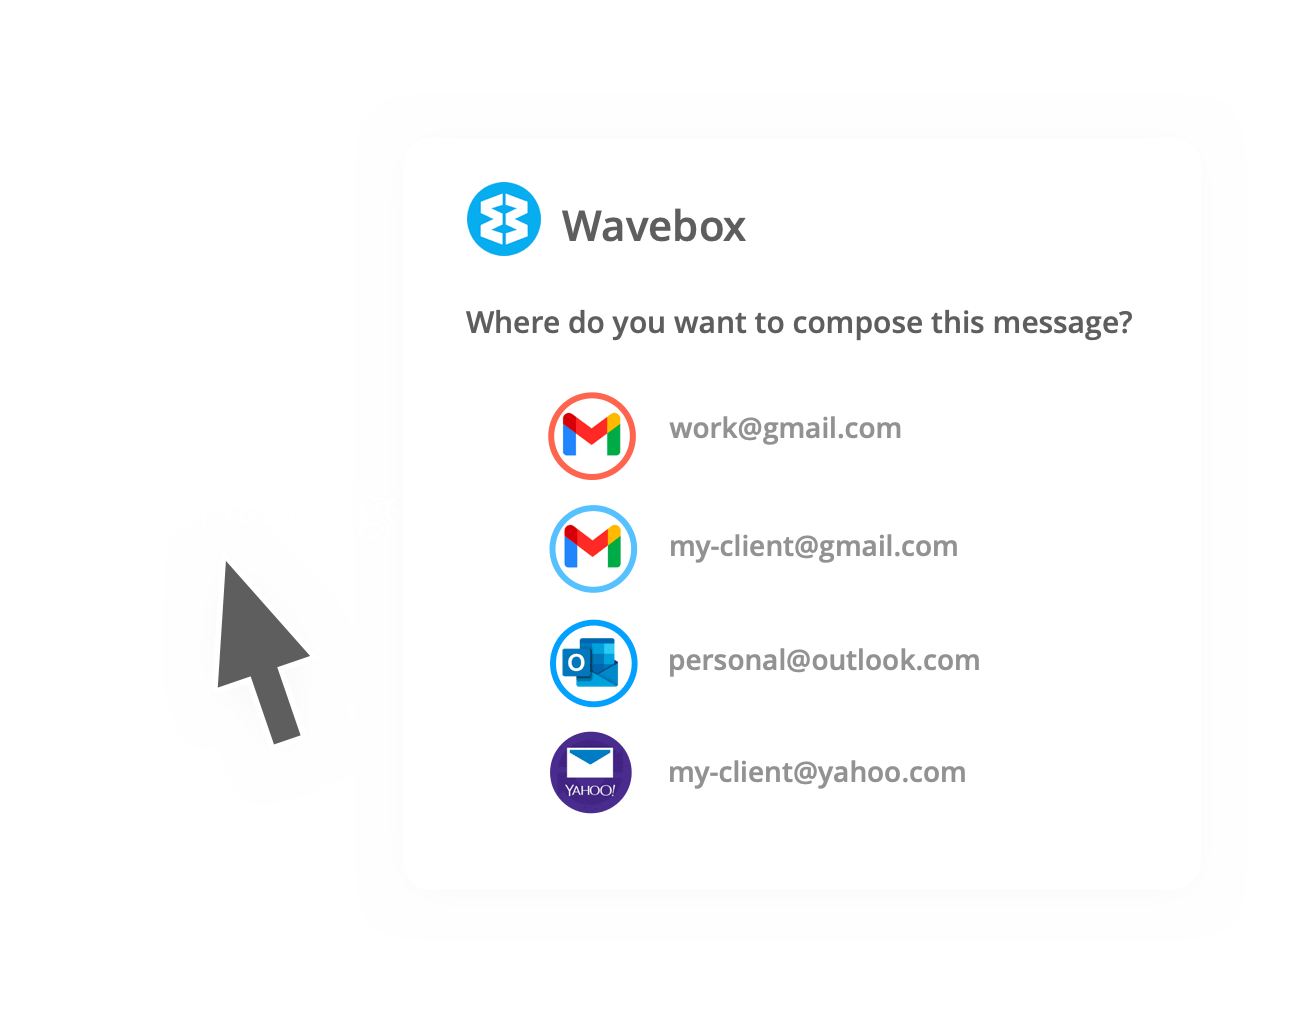 Choose which webmail account you want to use